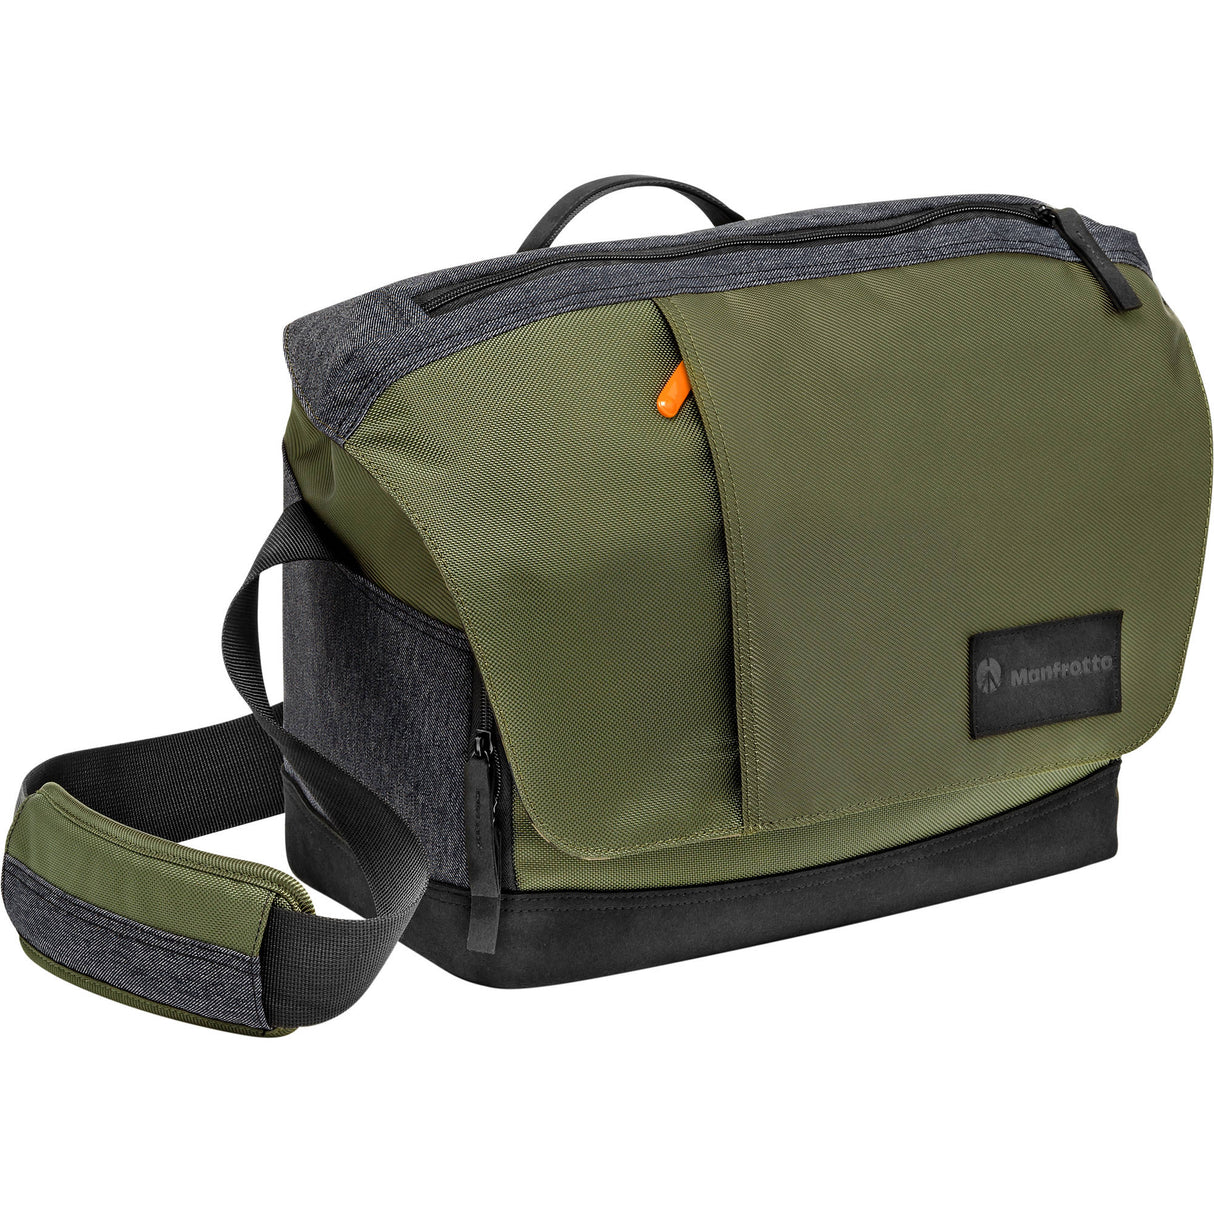 Manfrotto Street Camera Messenger I for DSLR/CSC (Green and Gray)